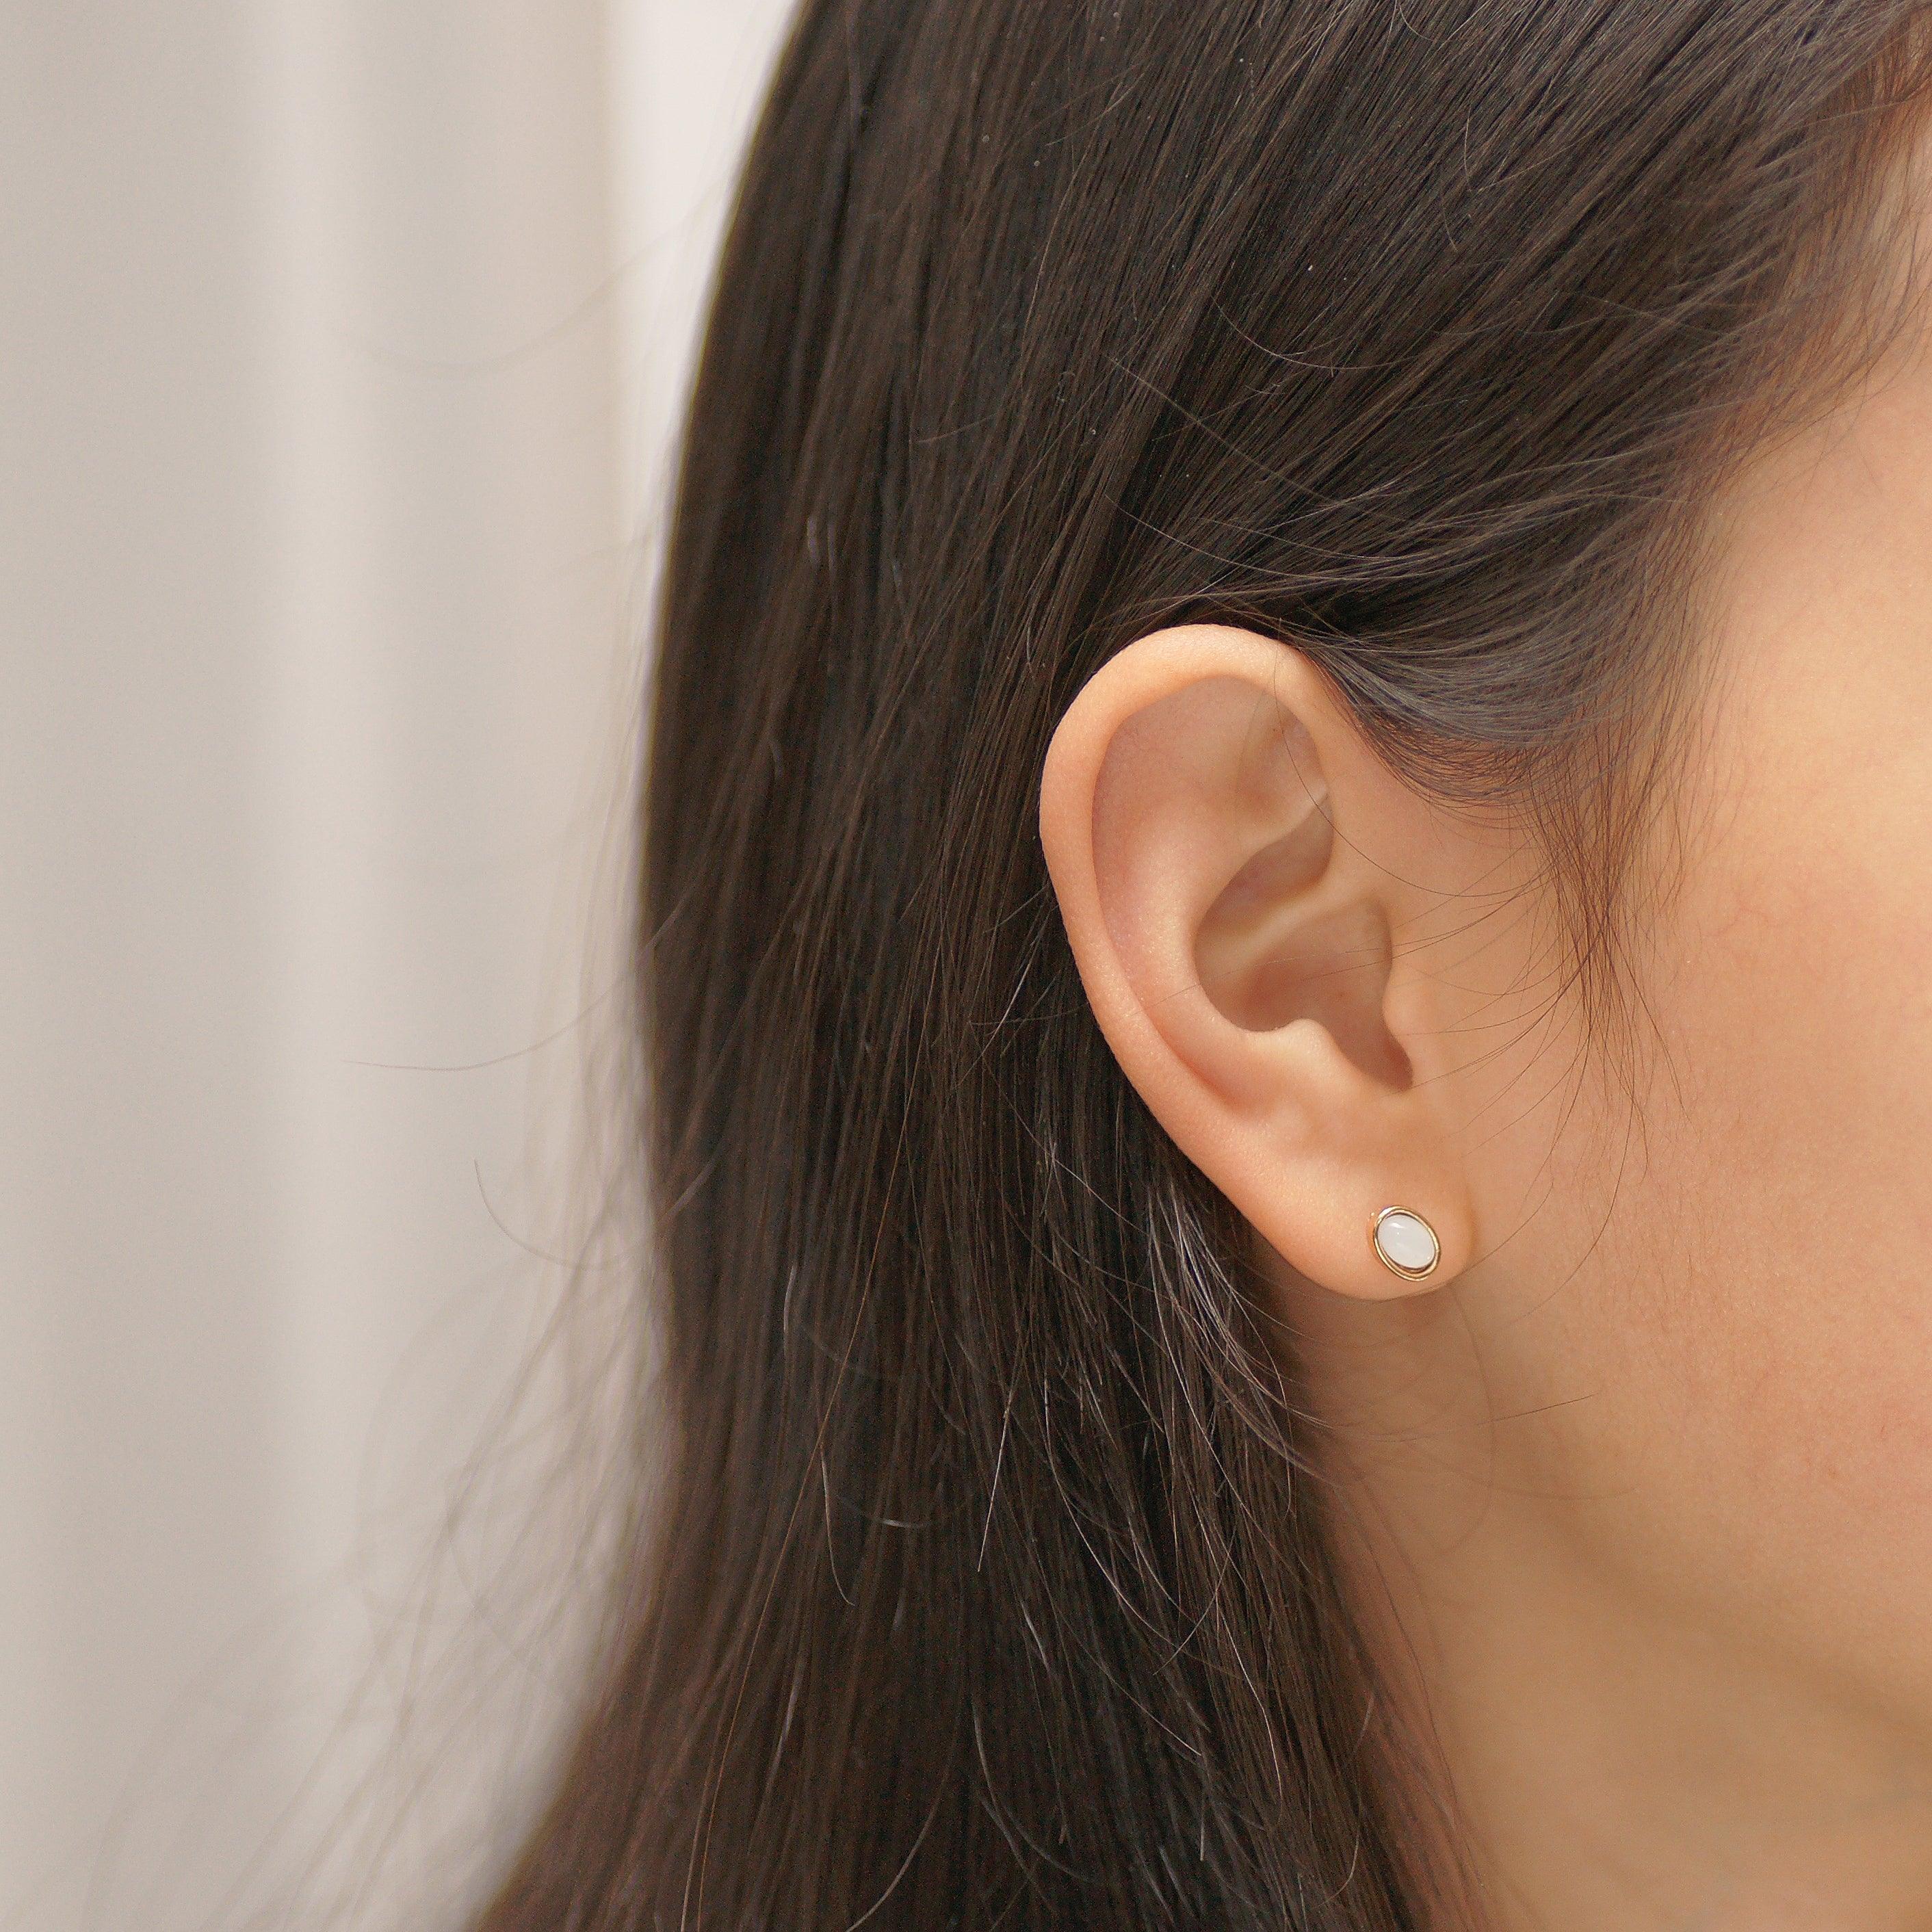 Pure White ピアス [8個セット] Earrings SET ME UP♡ 